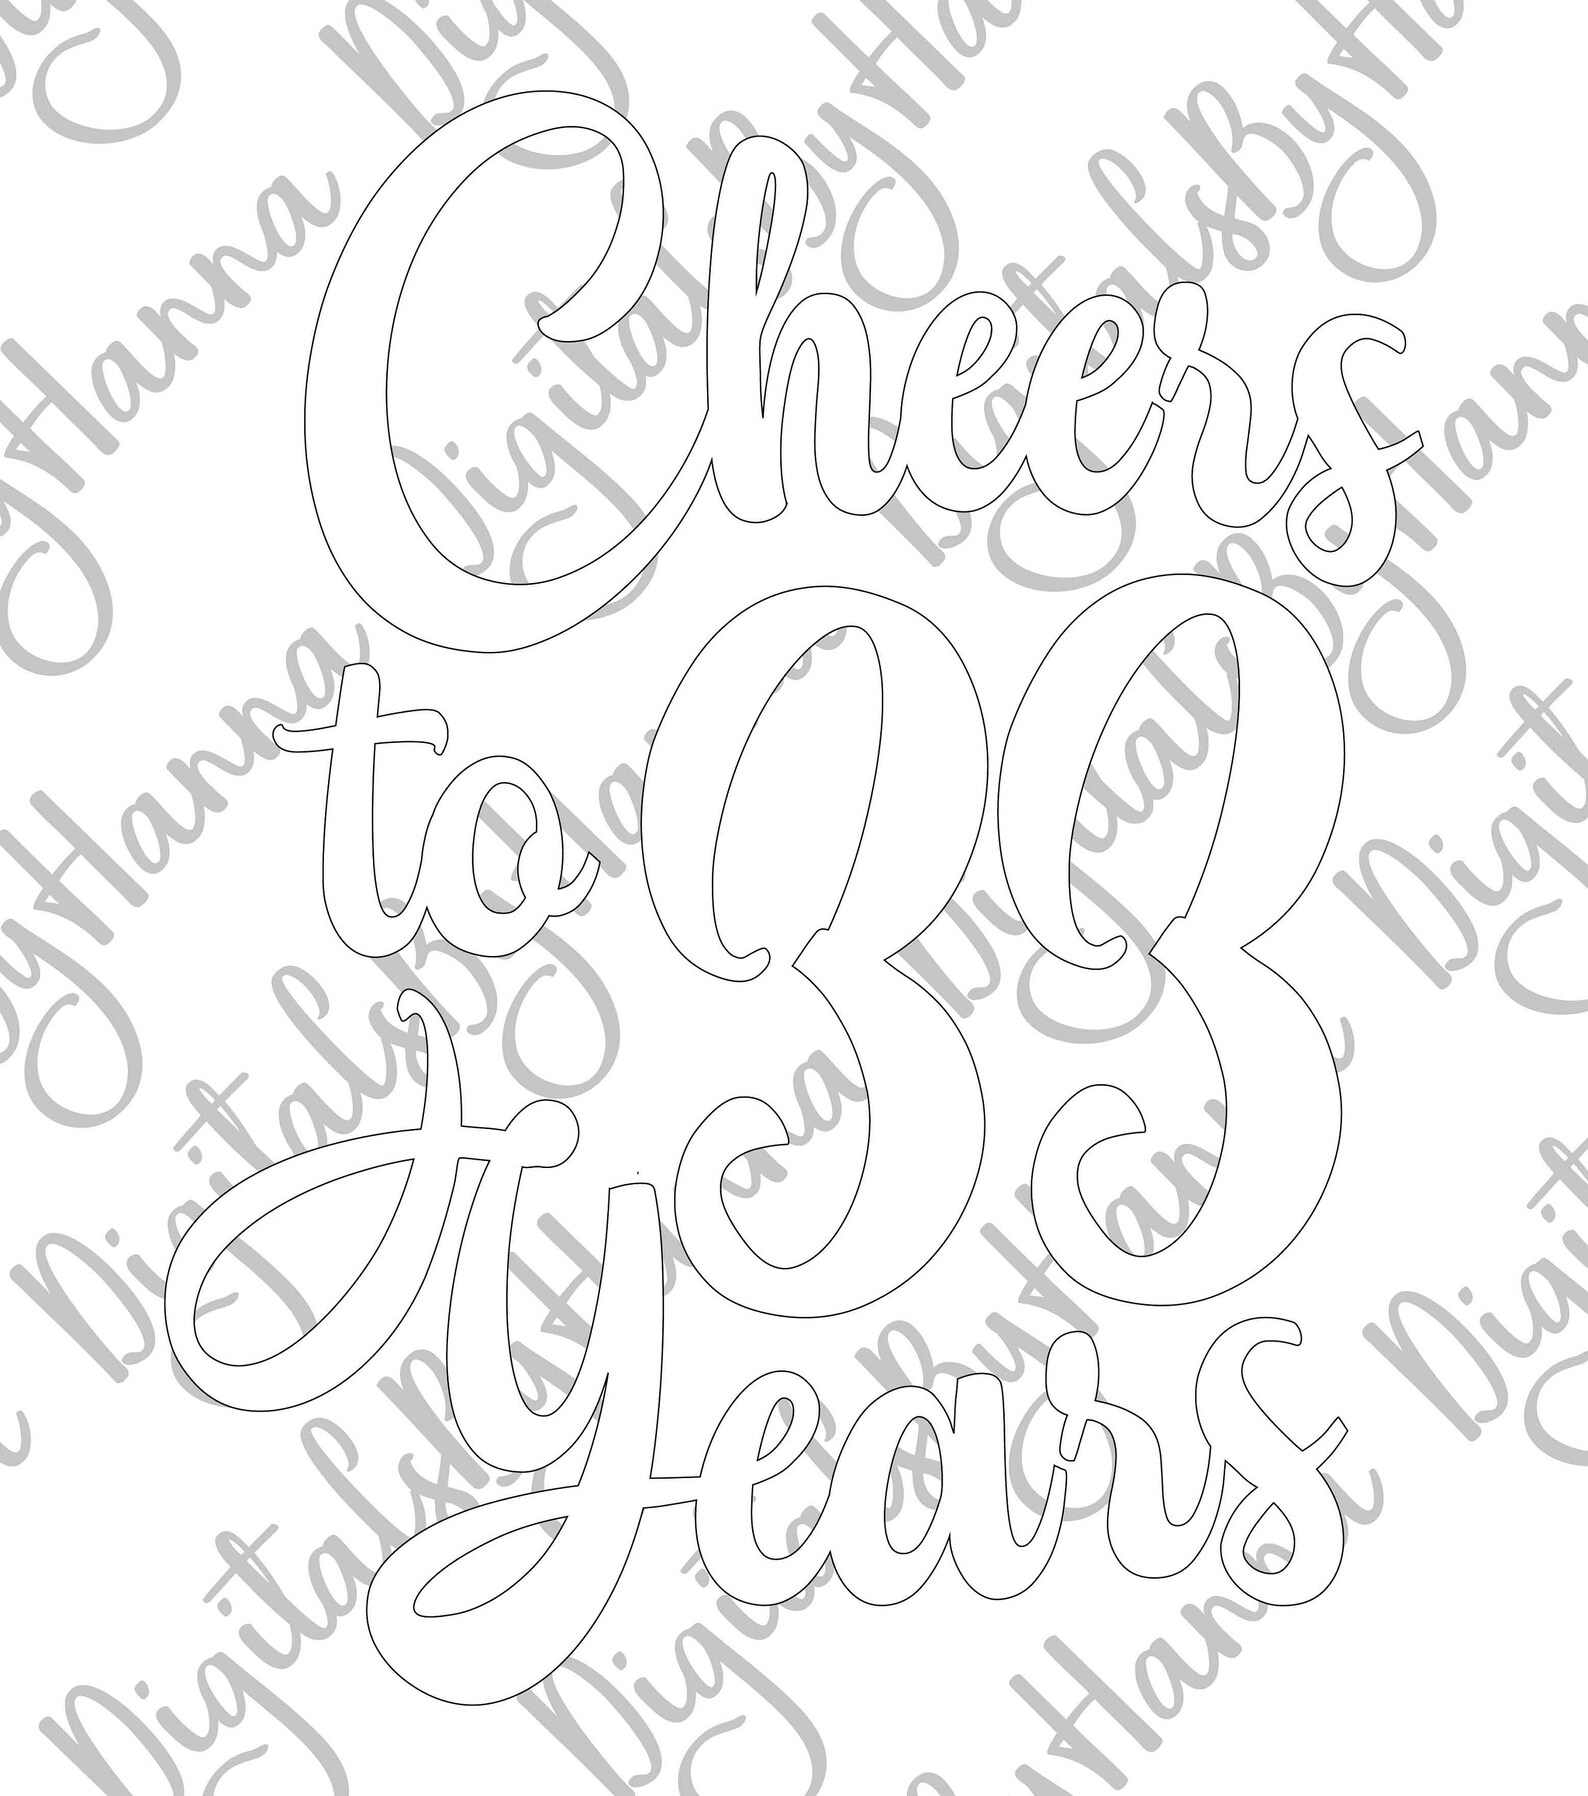 33rd Birthday SVG Files for Cricut Saying Cheers to 33 Years - Etsy UK